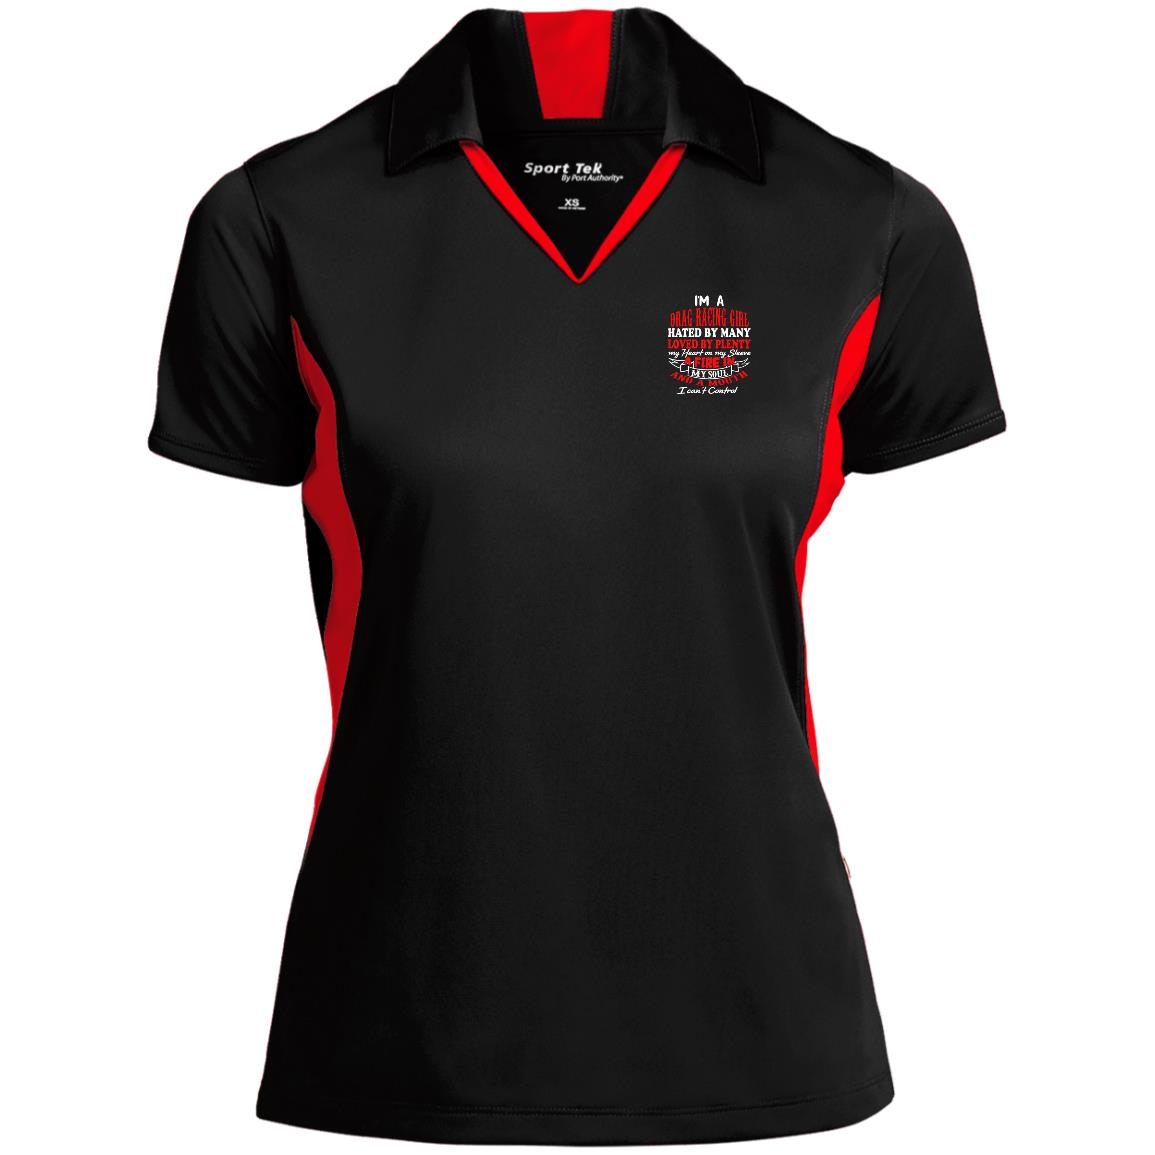 I'm A Drag Racing Girl Hated By Many Loved By Plenty Ladies' Colorblock Performance Polo